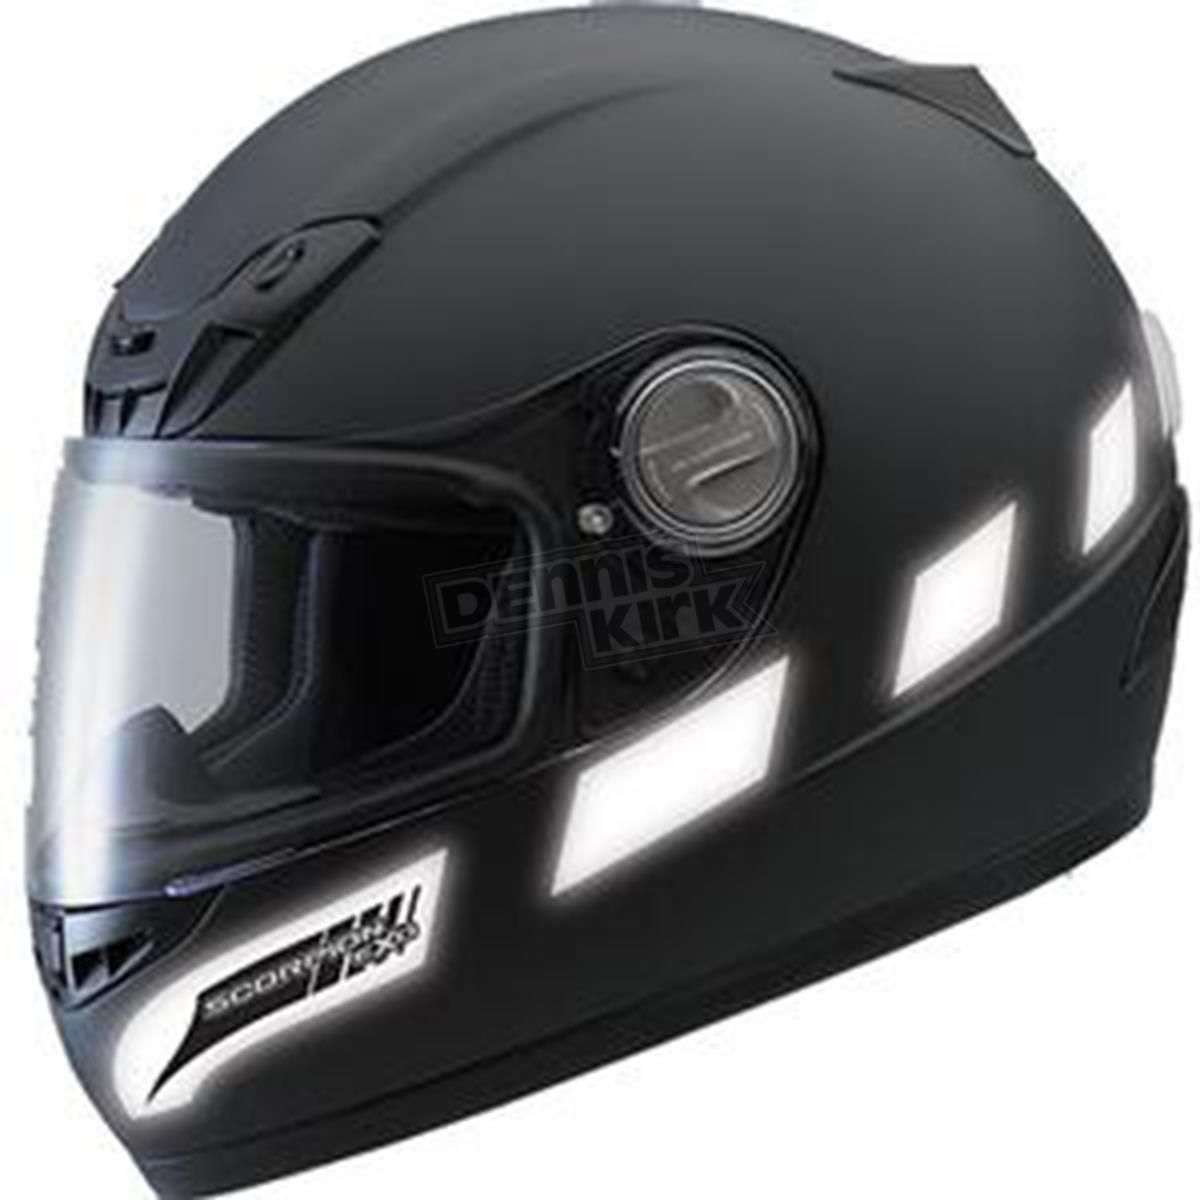 Best Reflective Motorcycle Helmet Stickers – 2021 Ultimate Guide